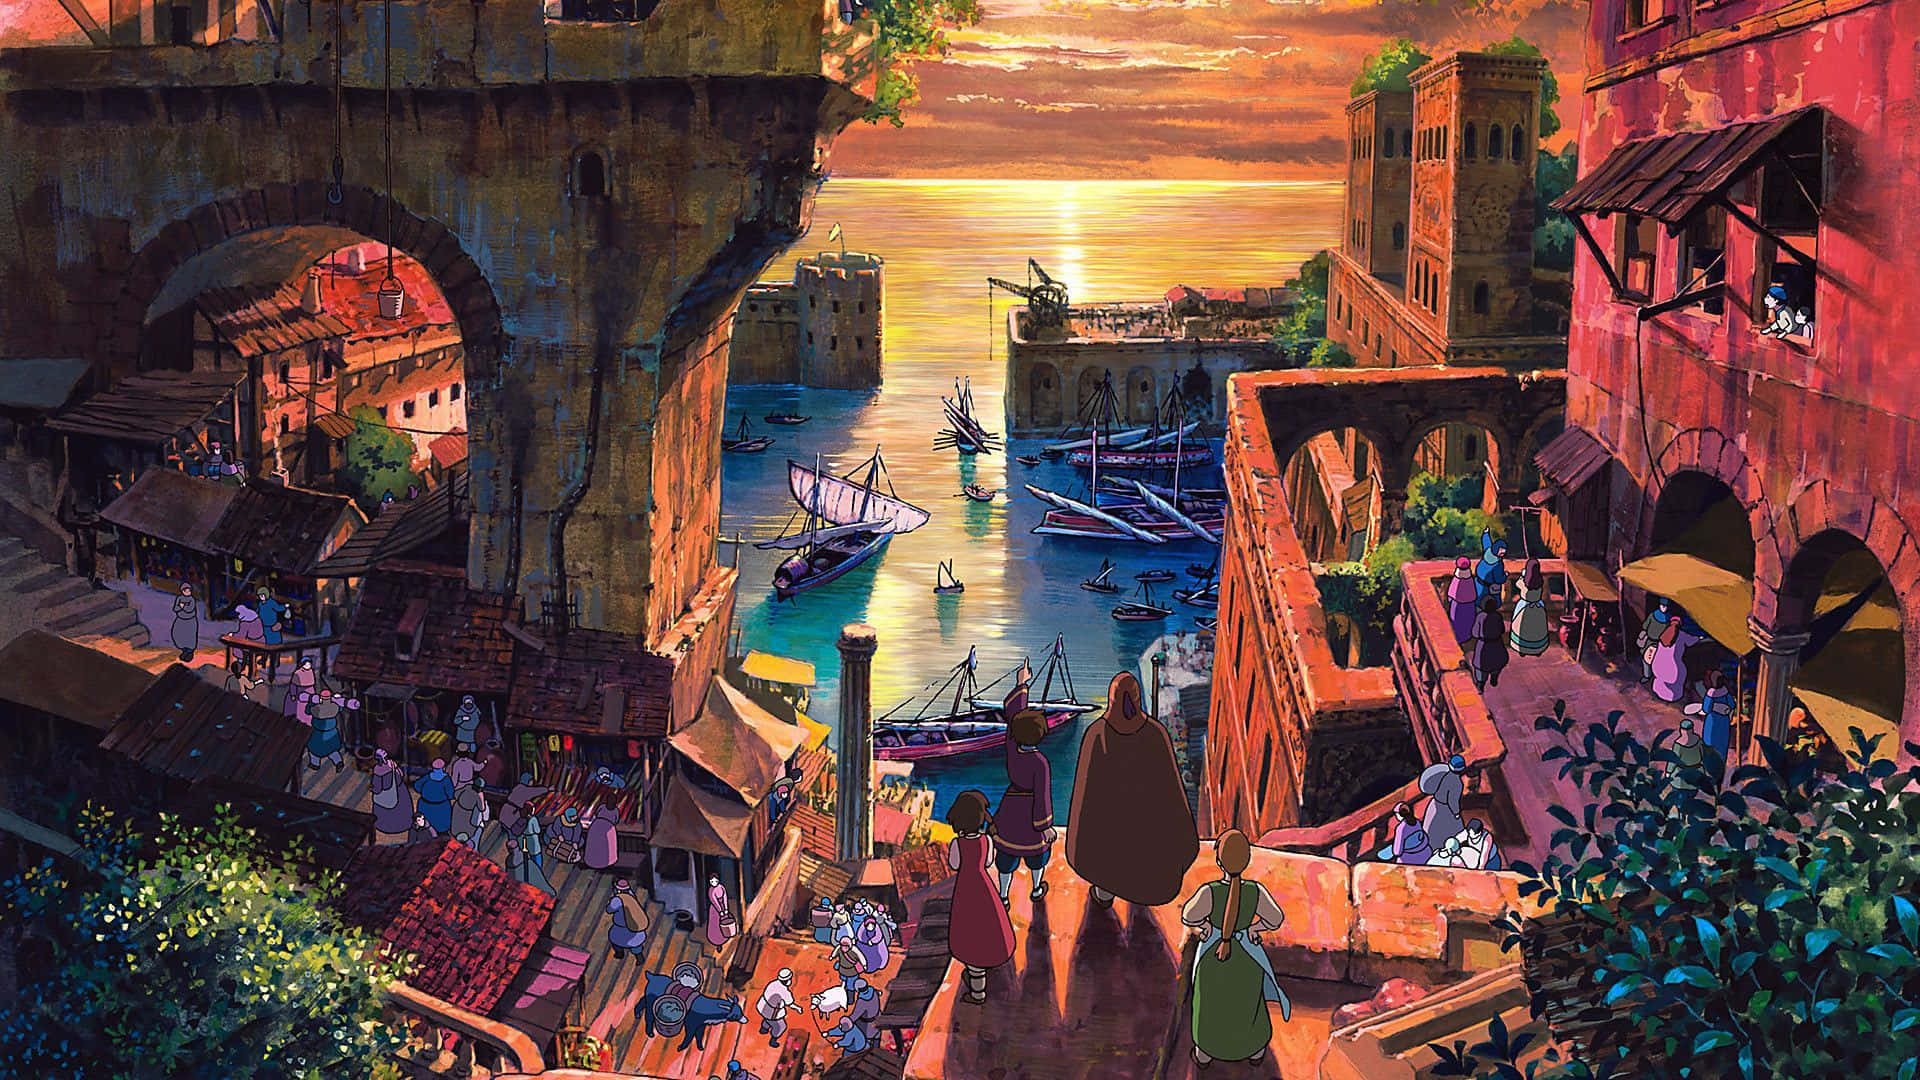 Tales From Earthsea - A magical journey begins Wallpaper